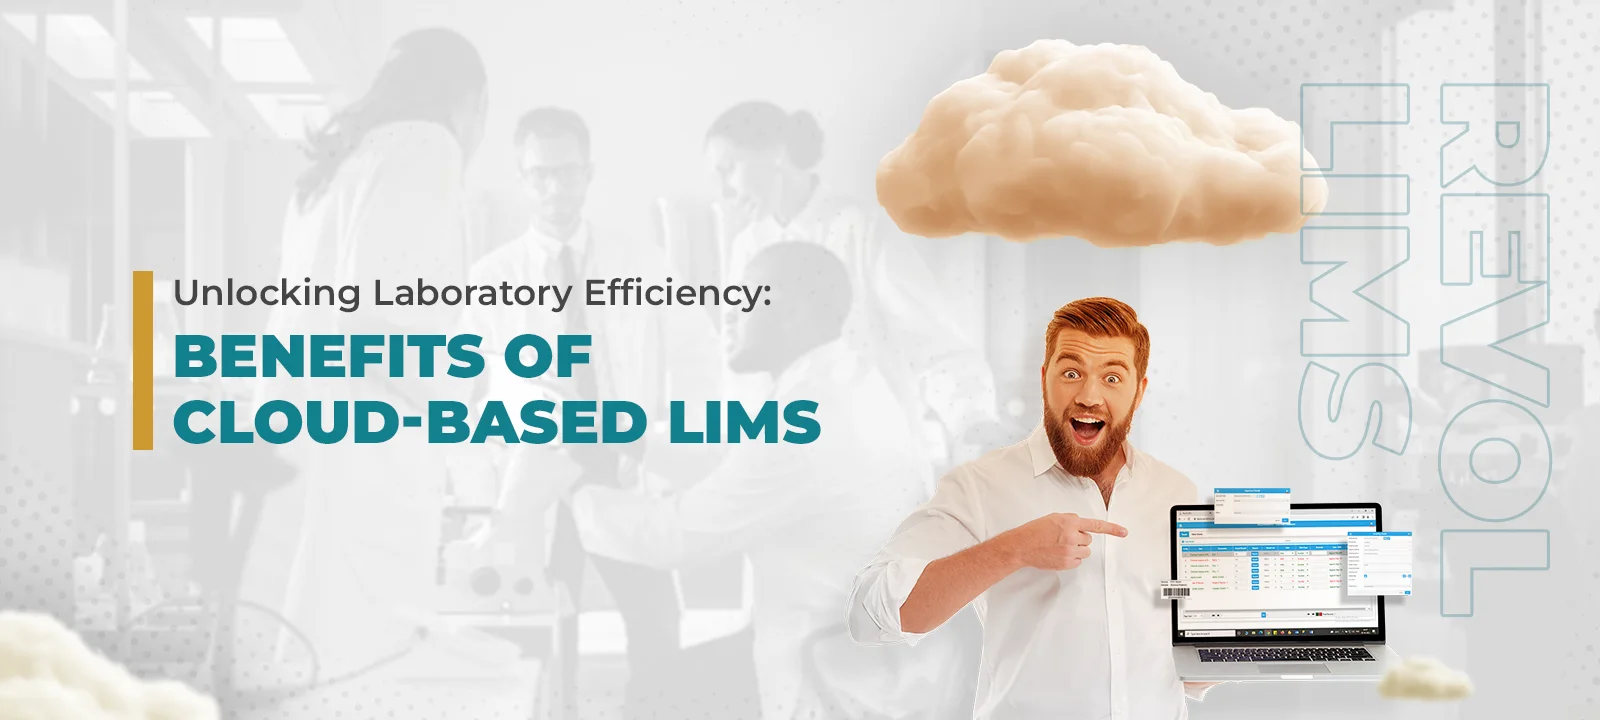  A man in a lab holding a laptop with a cloud above his head and text that says Unlocking Laboratory Efficiency: Benefits of Cloud-Based LIMS